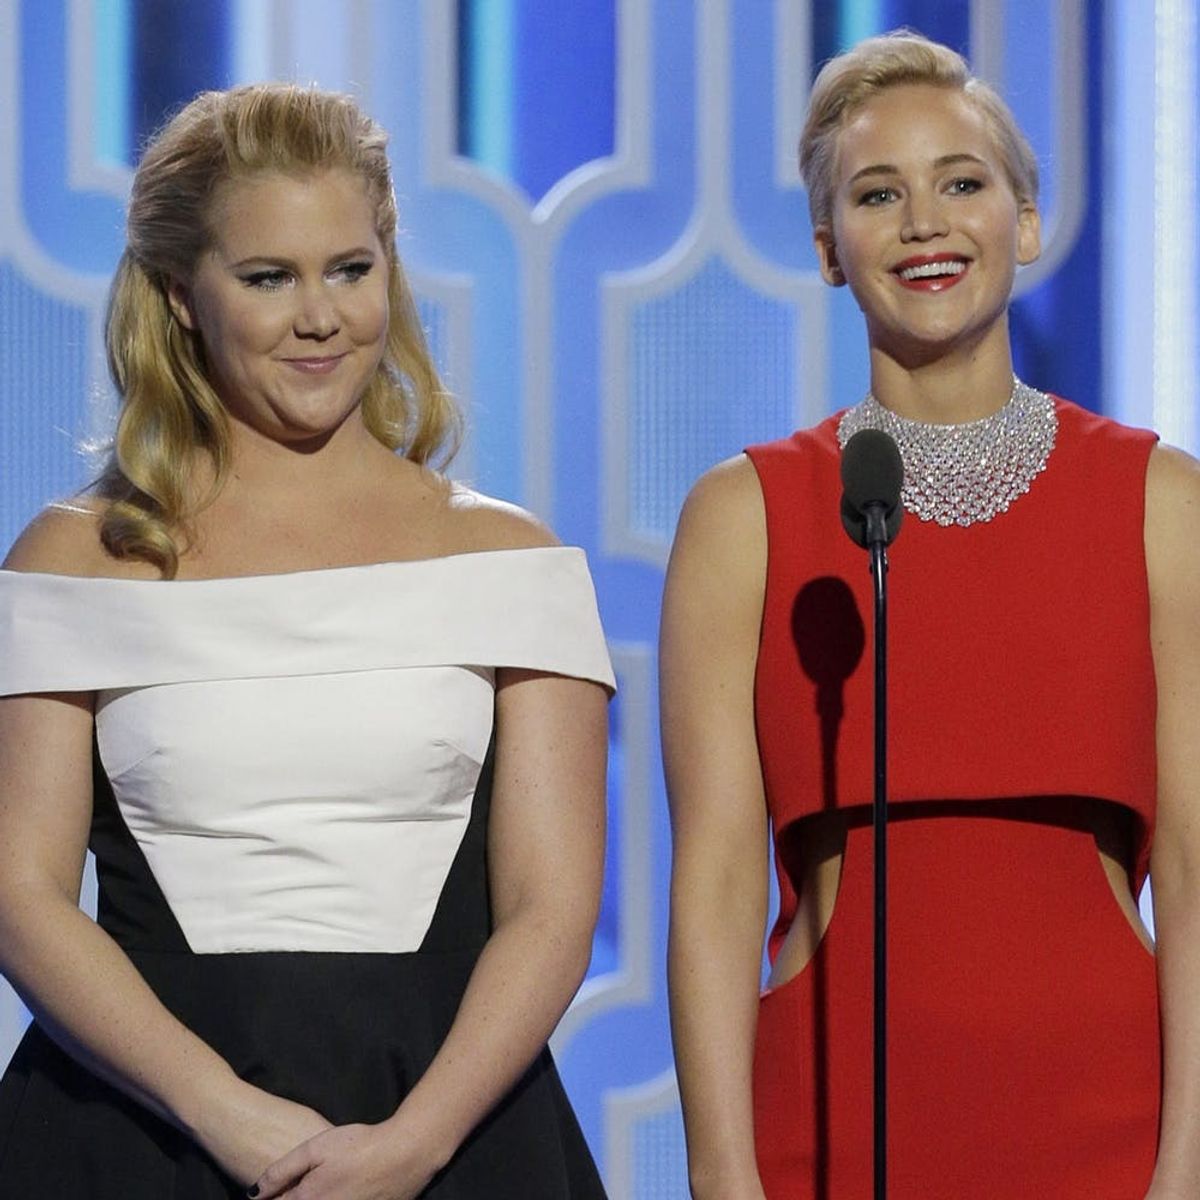 Jennifer Lawrence Dishes on BFF Amy Schumer’s ‘Beautiful’ Wedding Ceremony